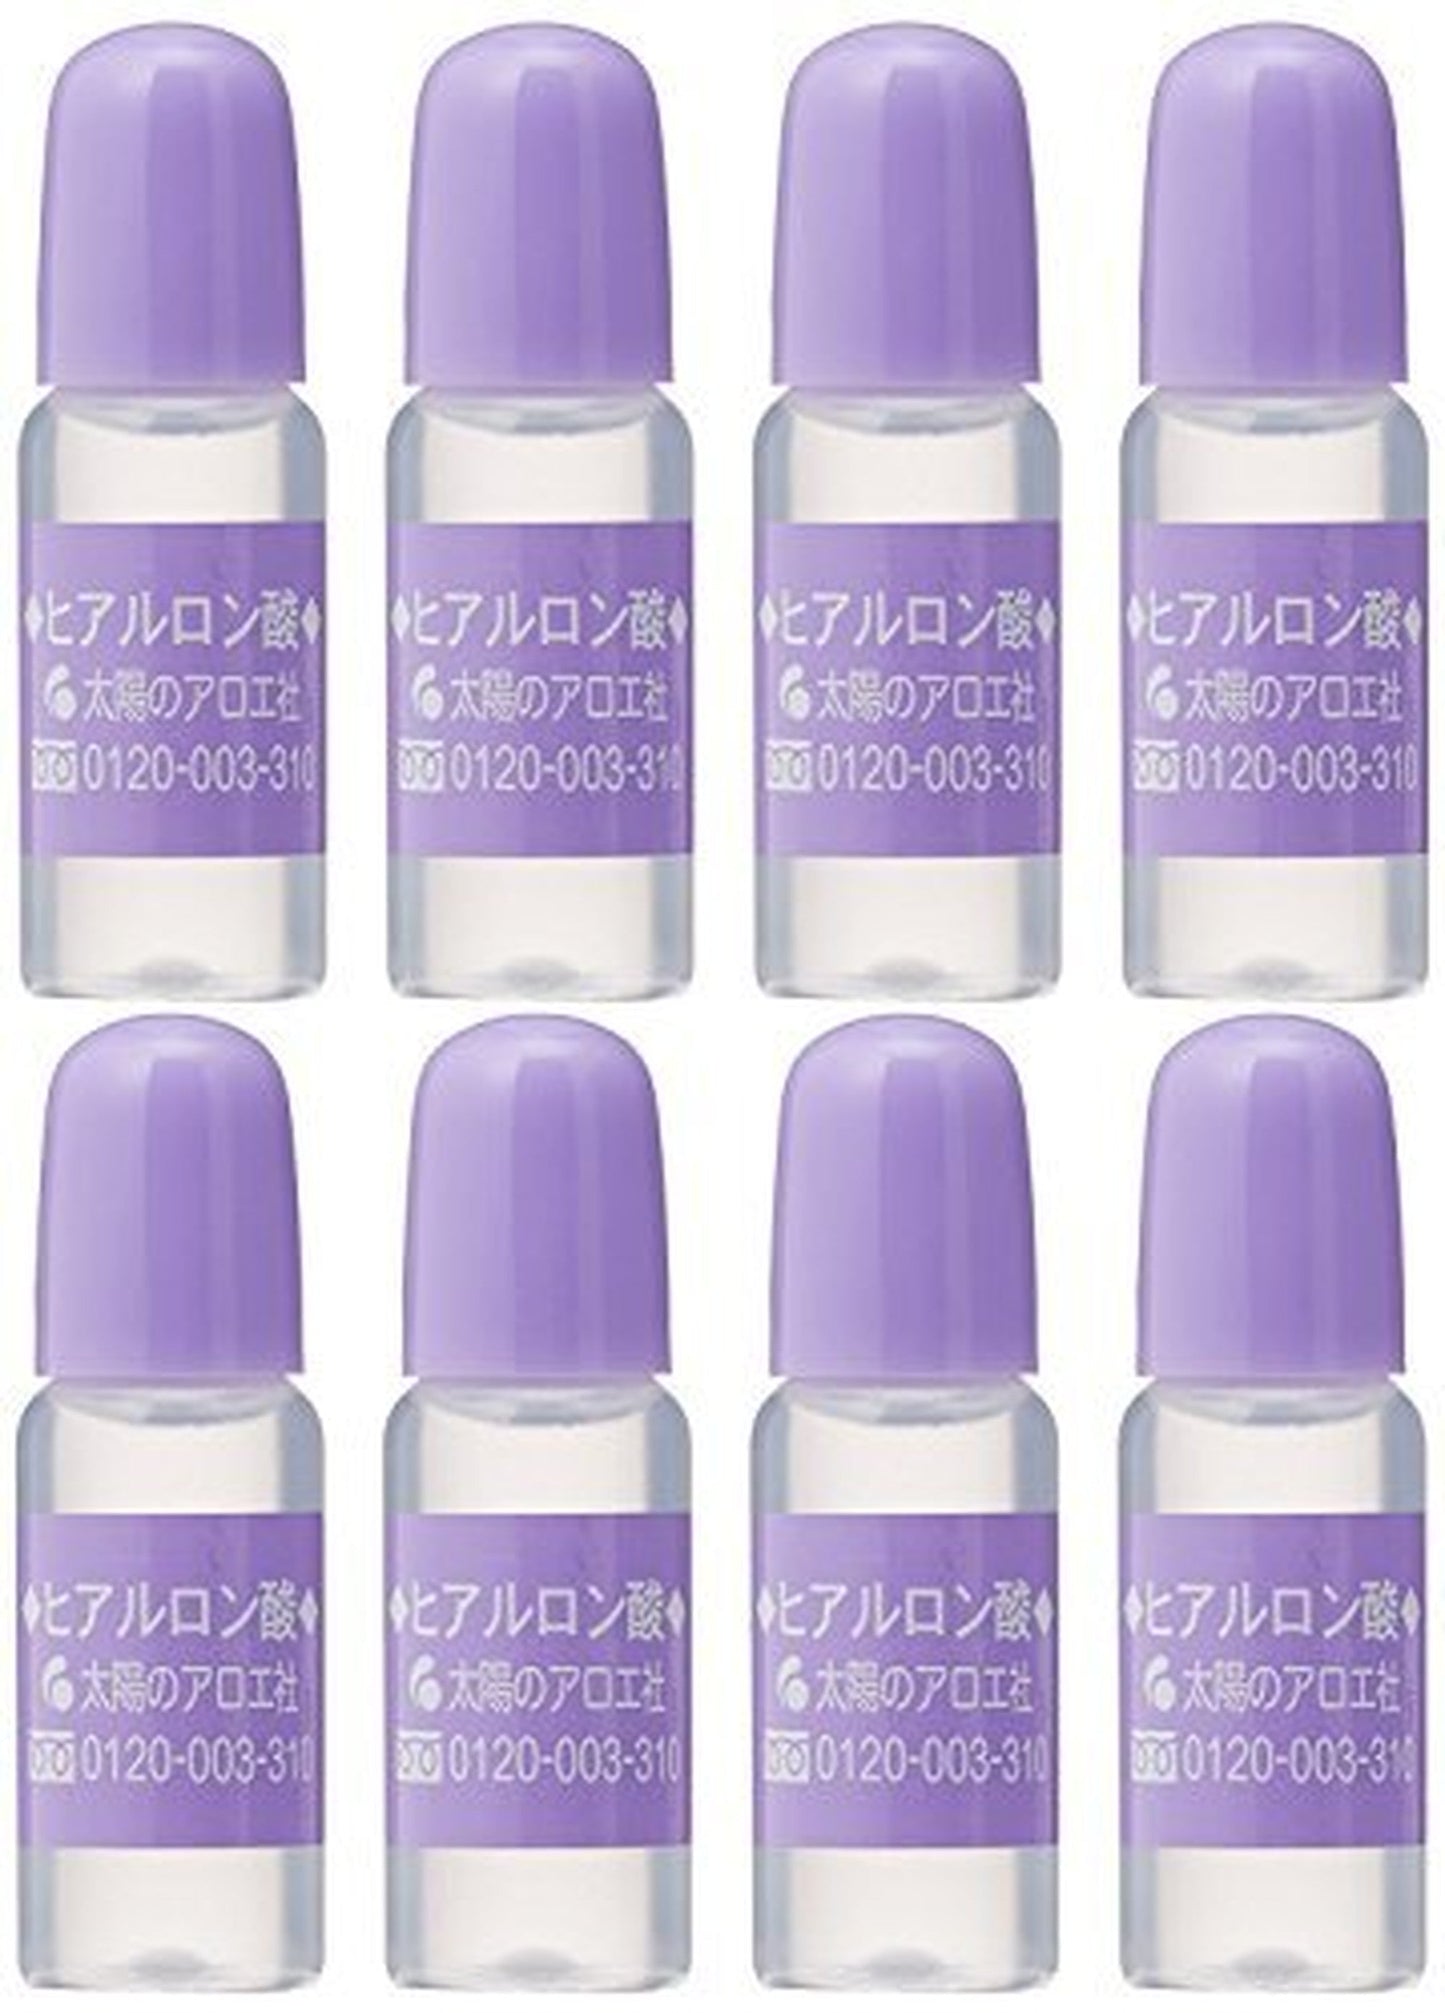 Set of 8 Taiyou no Aloe hyaluronic acid 10ml x 8 pieces